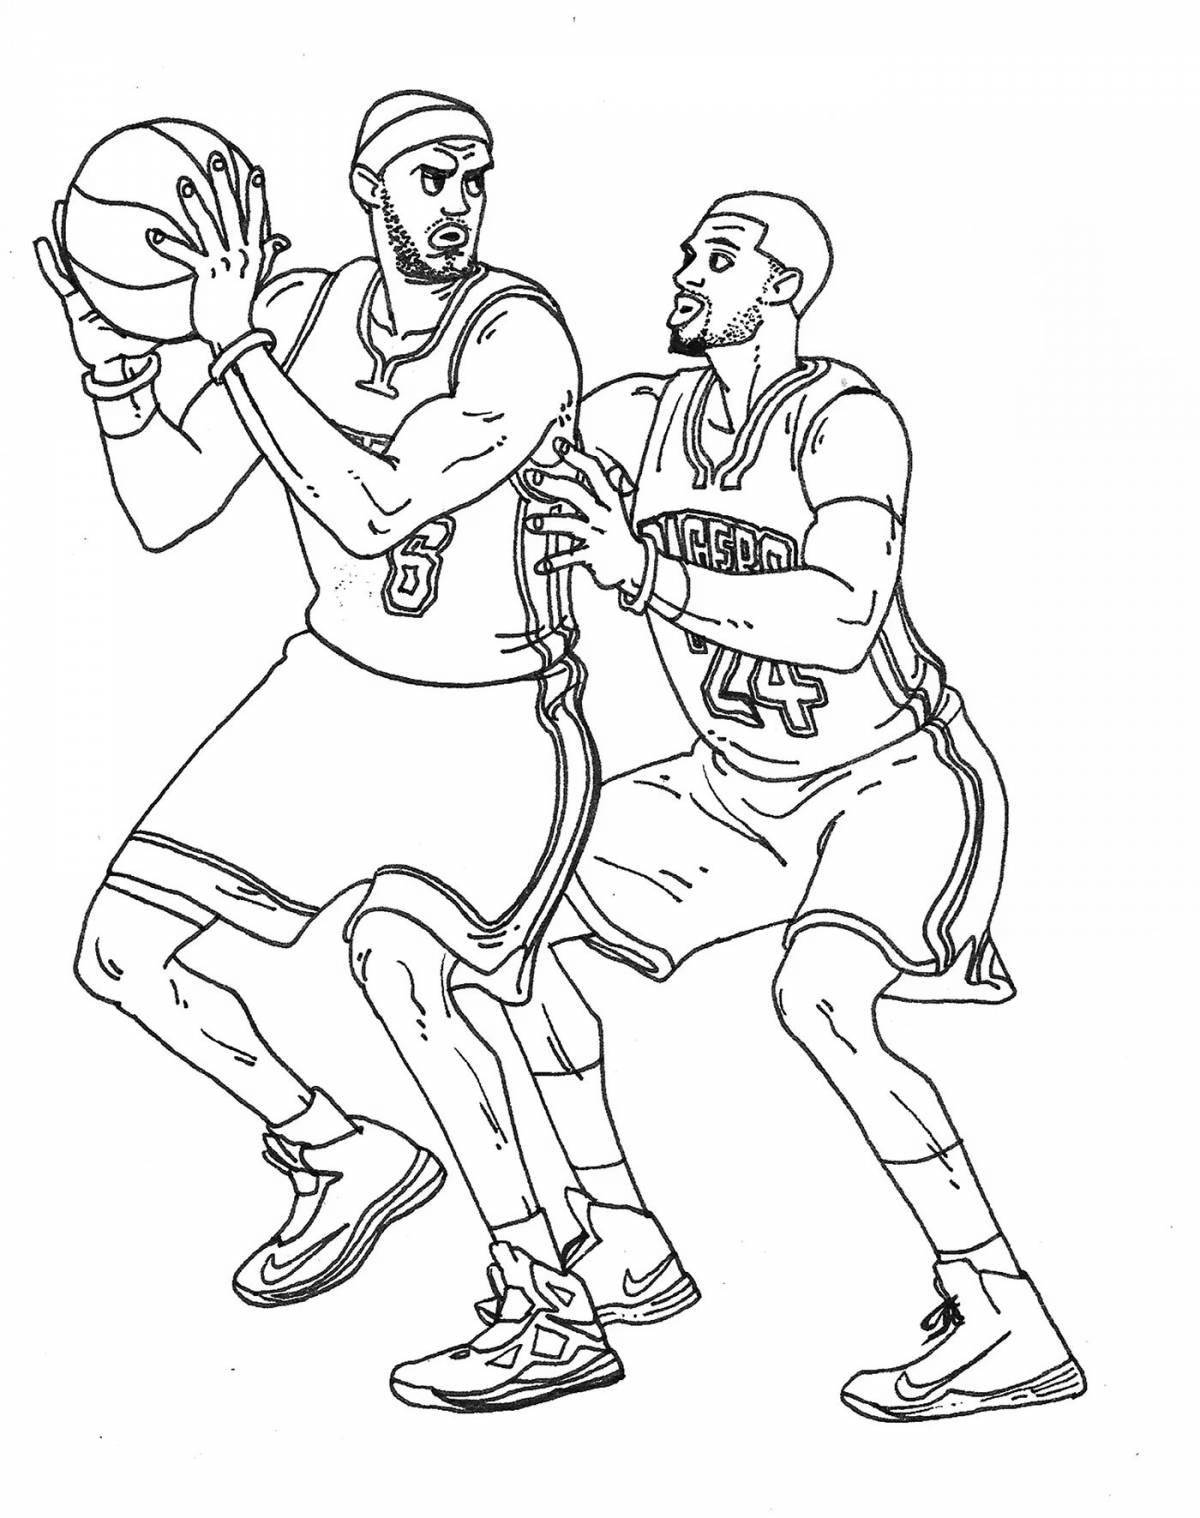 Lebron james' gorgeous coloring page